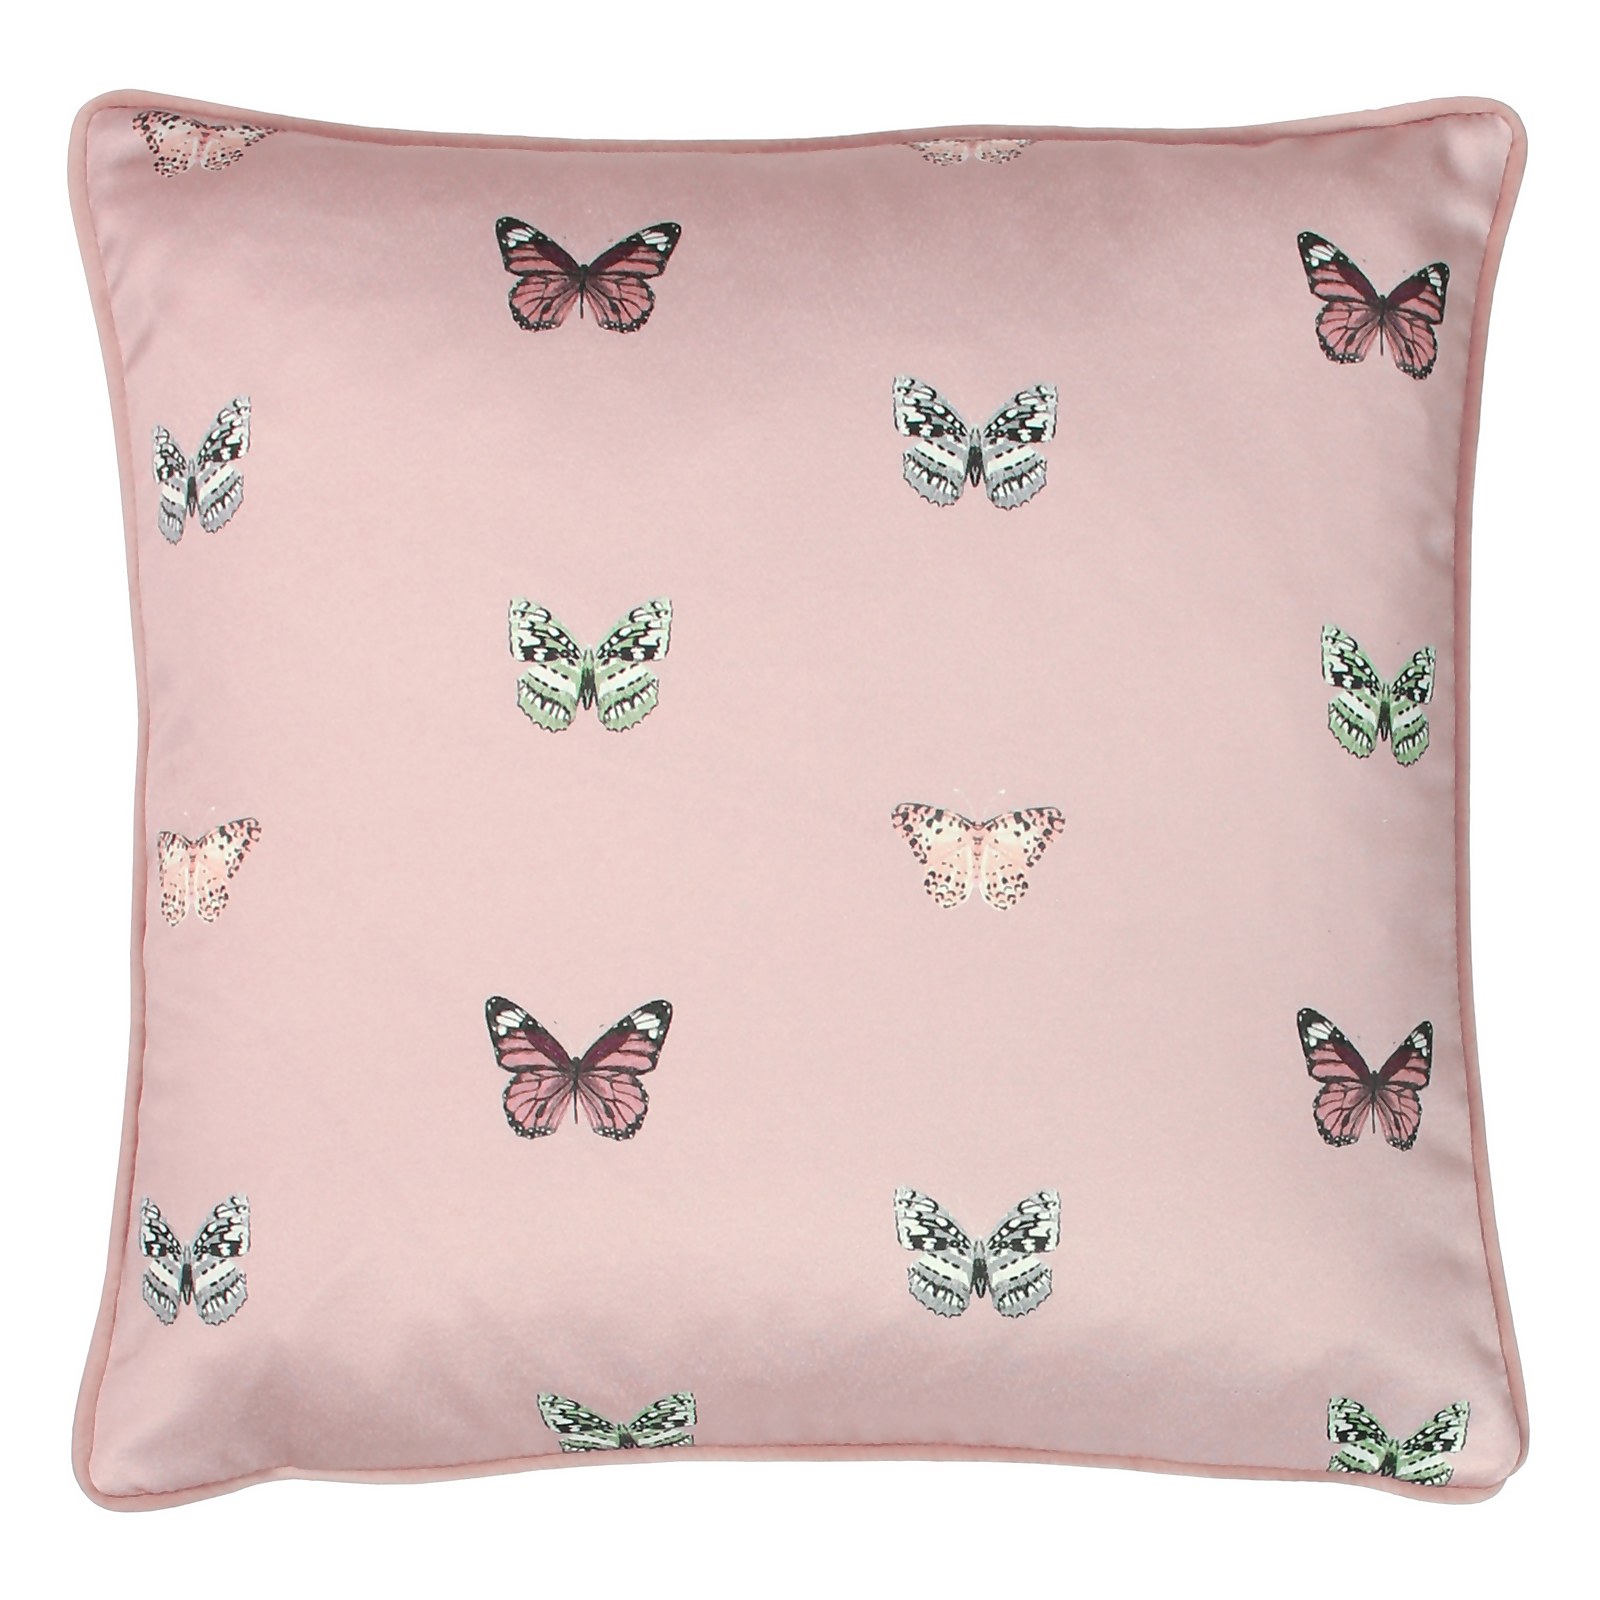 Photo of Butterfly Printed Cushion - 43x43cm